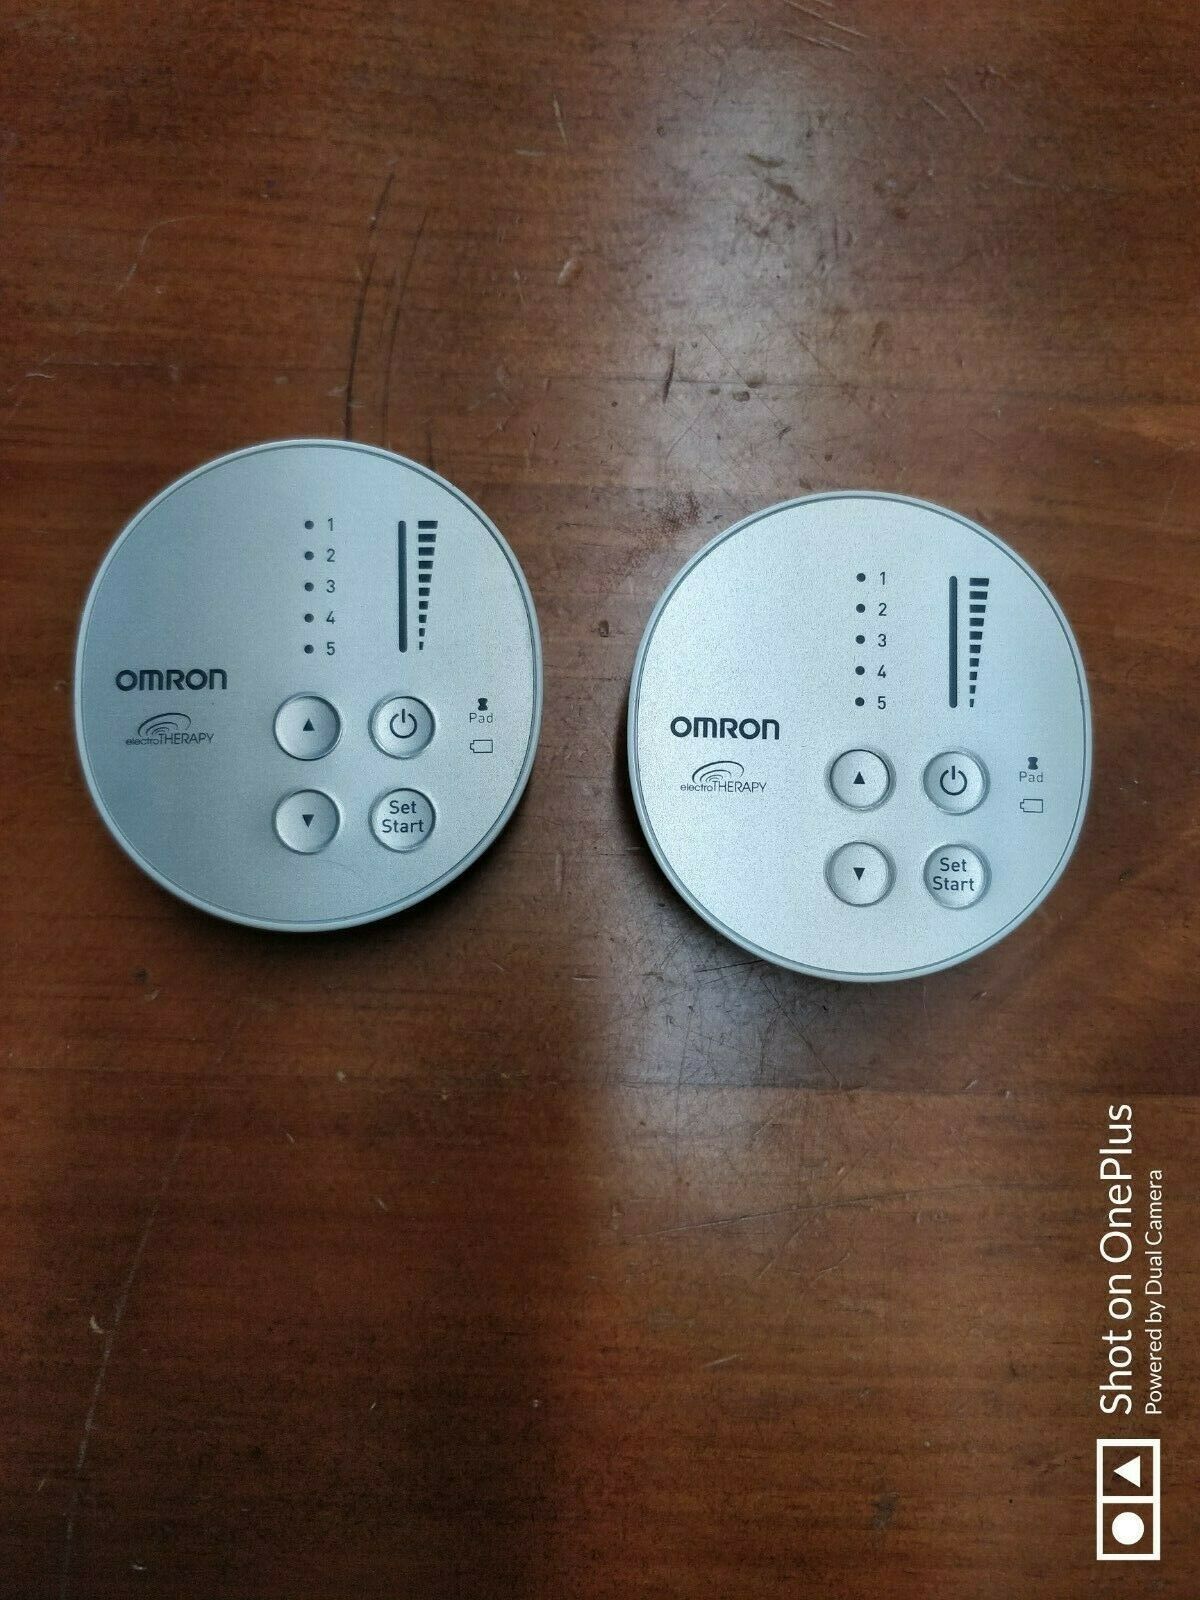 Omron Pocket Pain Pro Electro Therapy Pad Devices (2) - Pm3029 / Ref Hv-f013-z